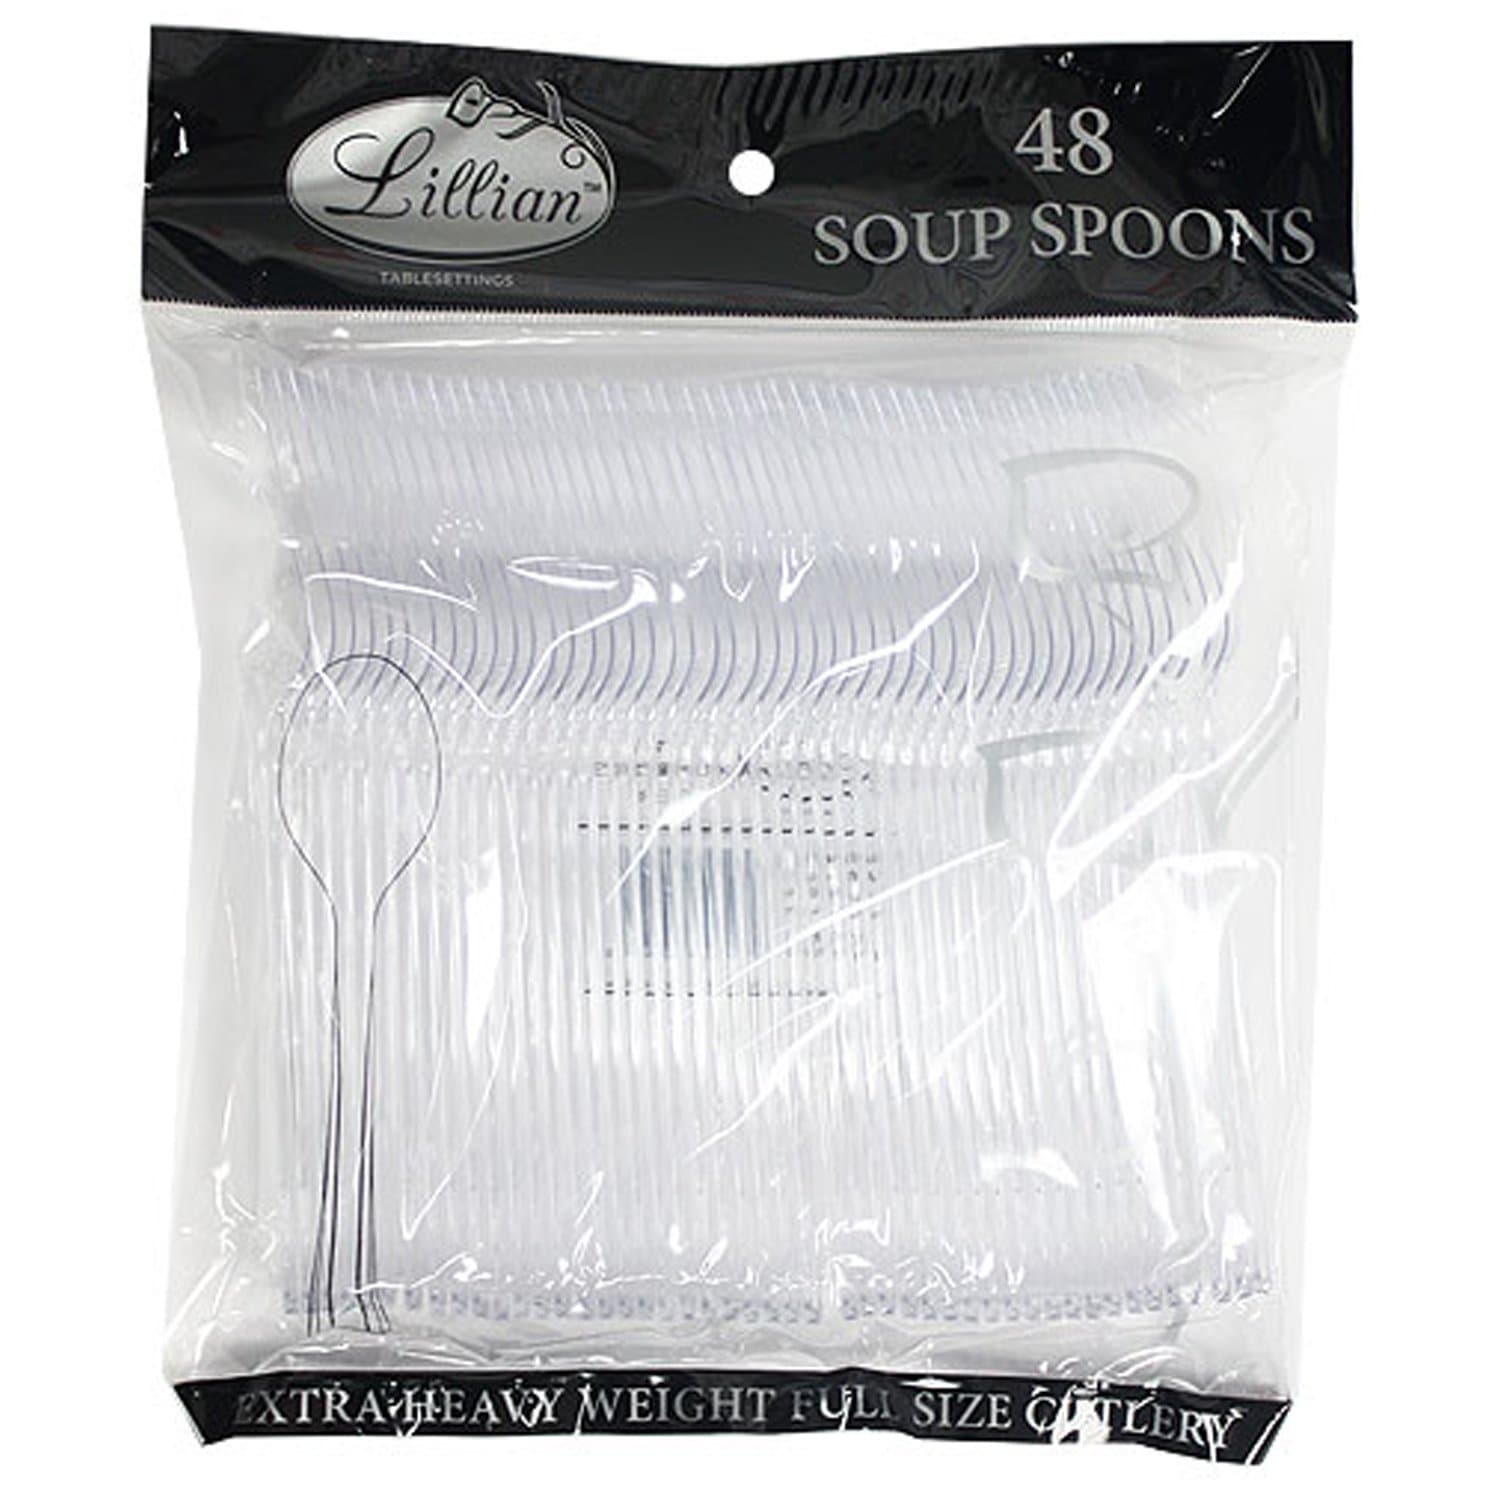 Lillian Tablesettings Extra Strong Quality Premium Plastic Clear Soup Spoons Cutlery Lillian   